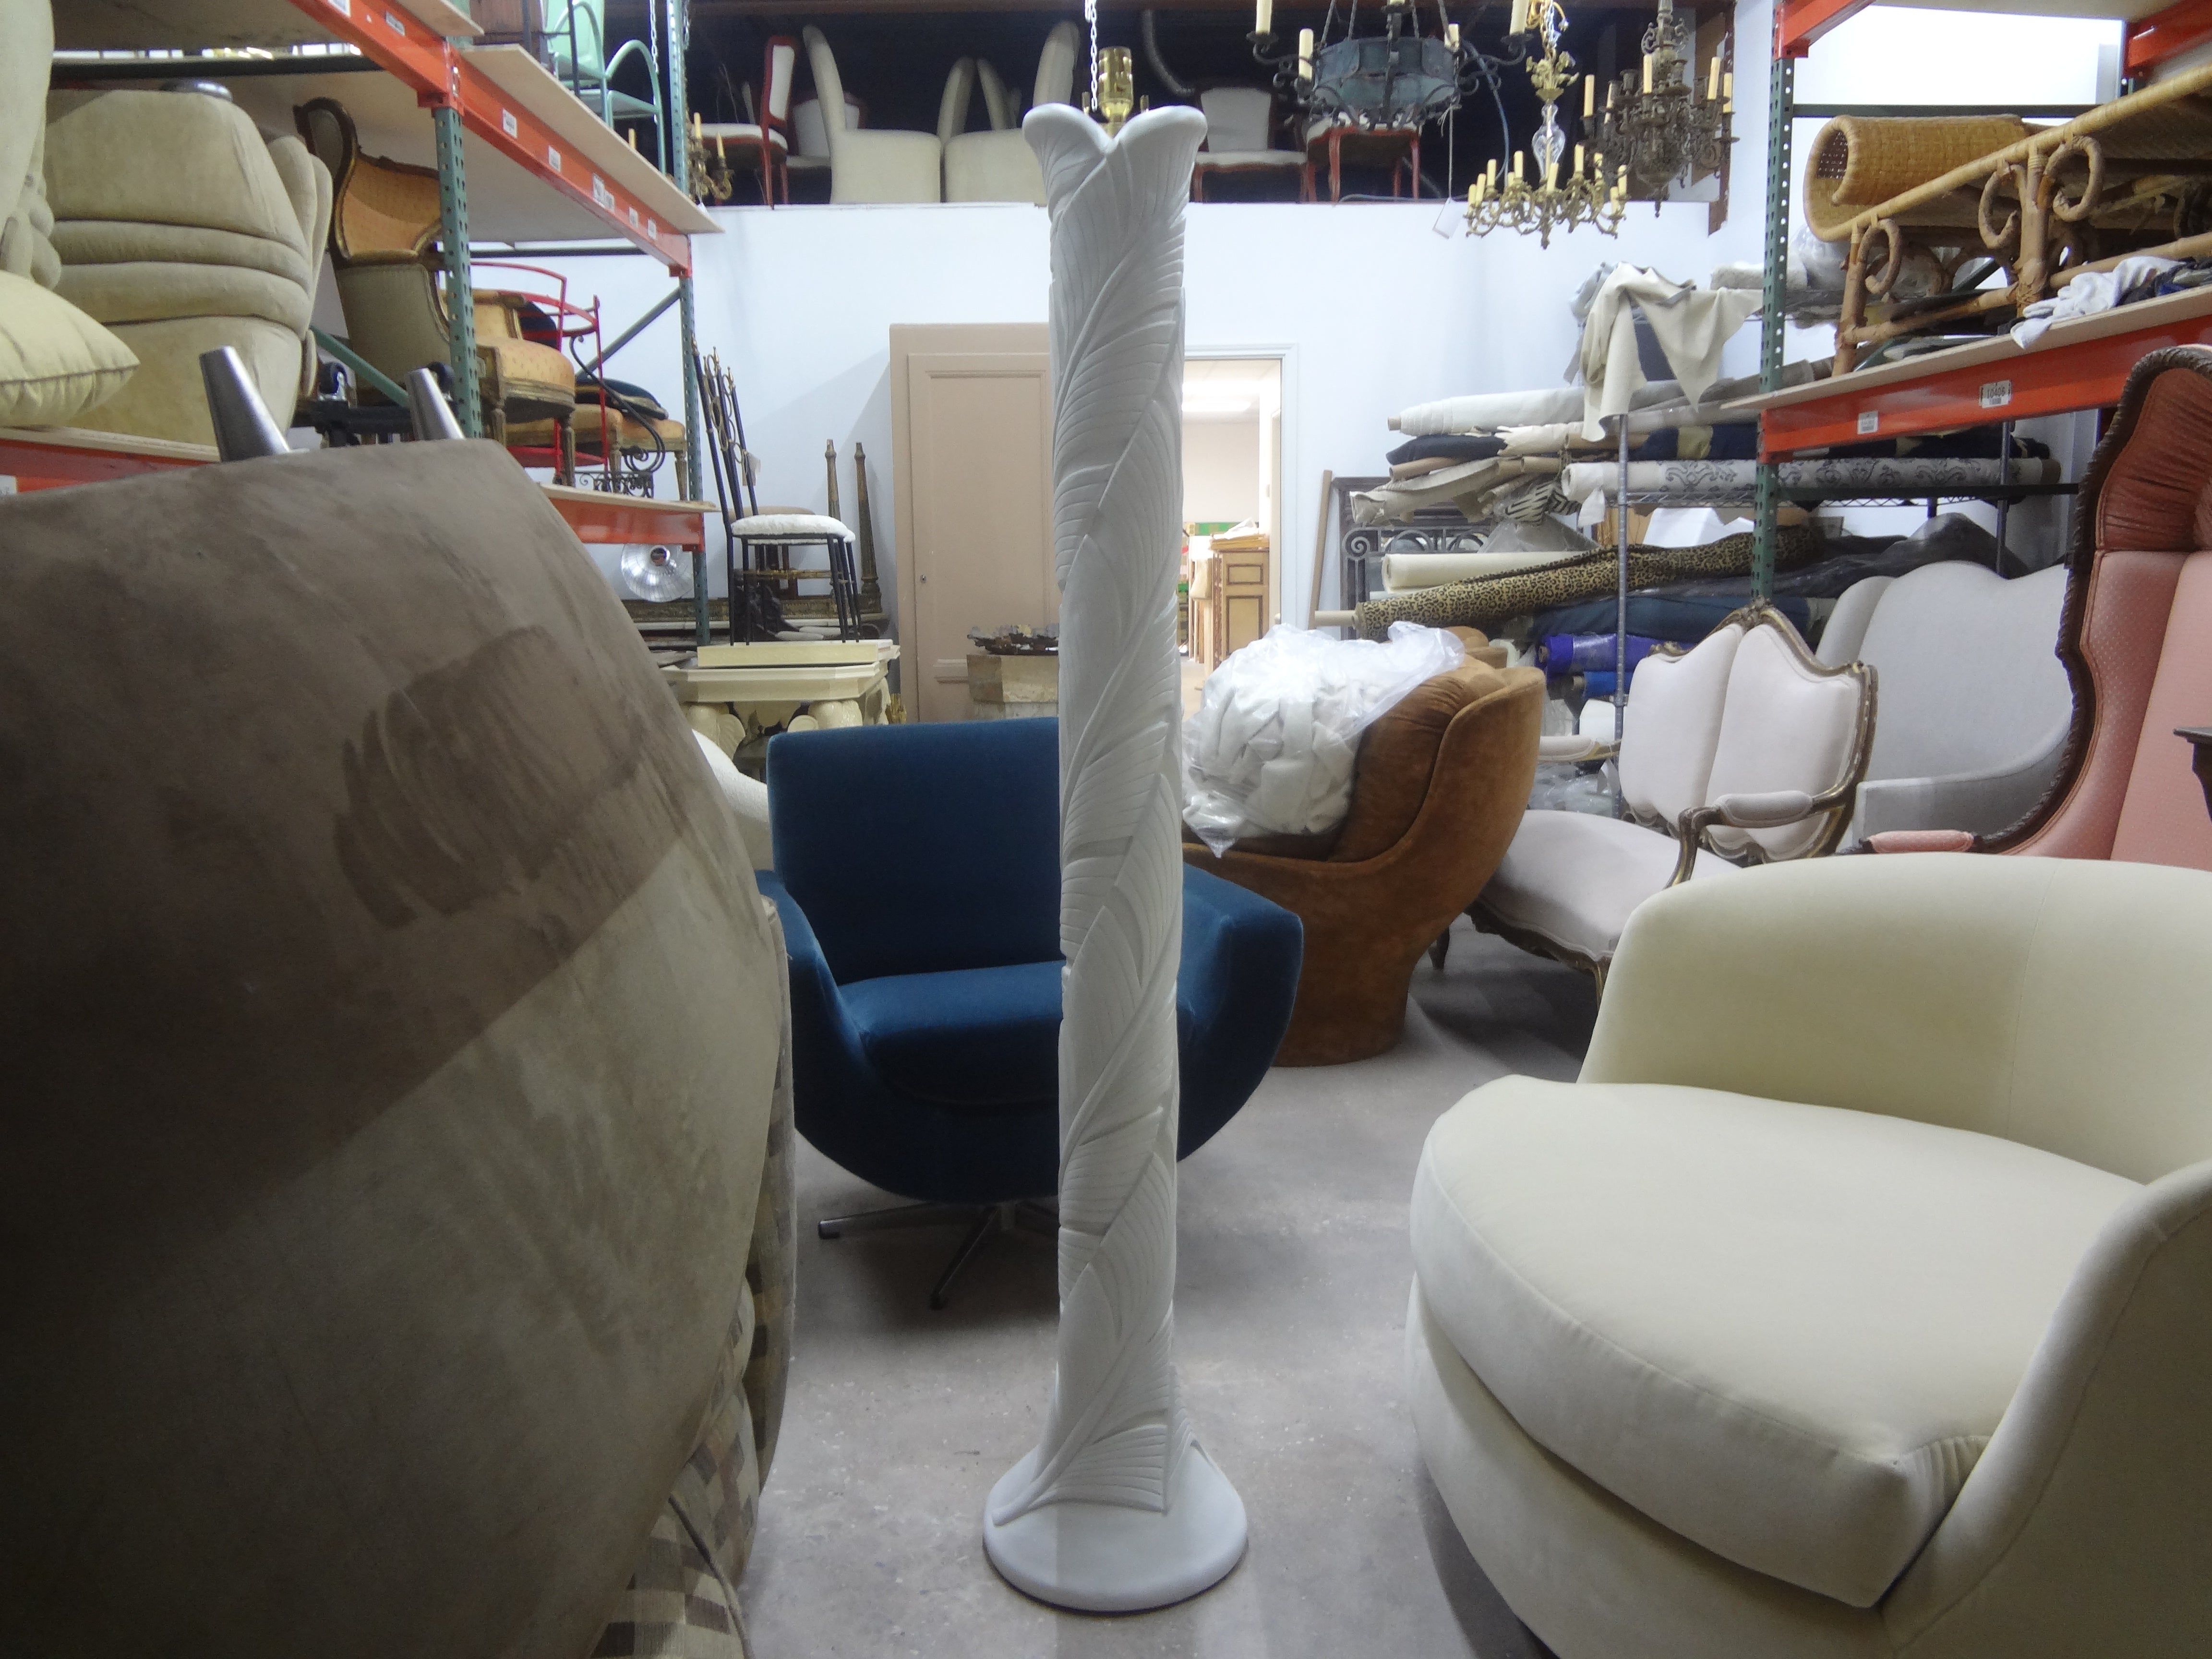 French Postmodern palm frond plaster floor lamp inspired by Serge Roche. This tall French modern plaster floor lamp has a beautiful palm frond design and has been newly wired with brass fittings and socket for U.S. use.